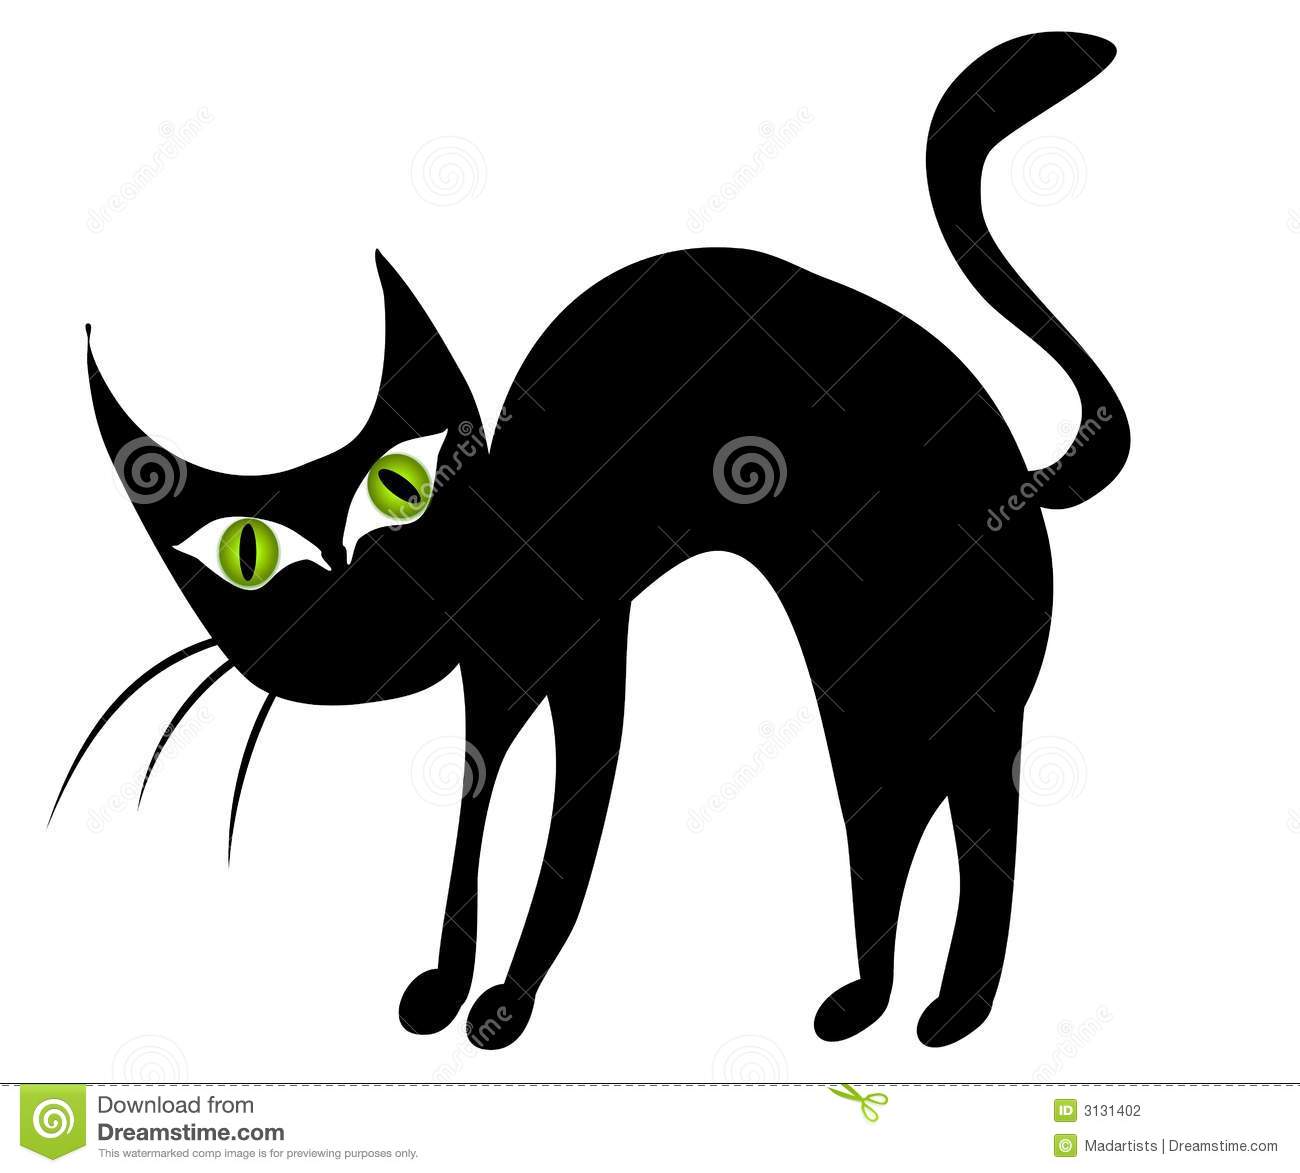 Clip Art Illustration Of A Black Cat With Big Green Eyes With